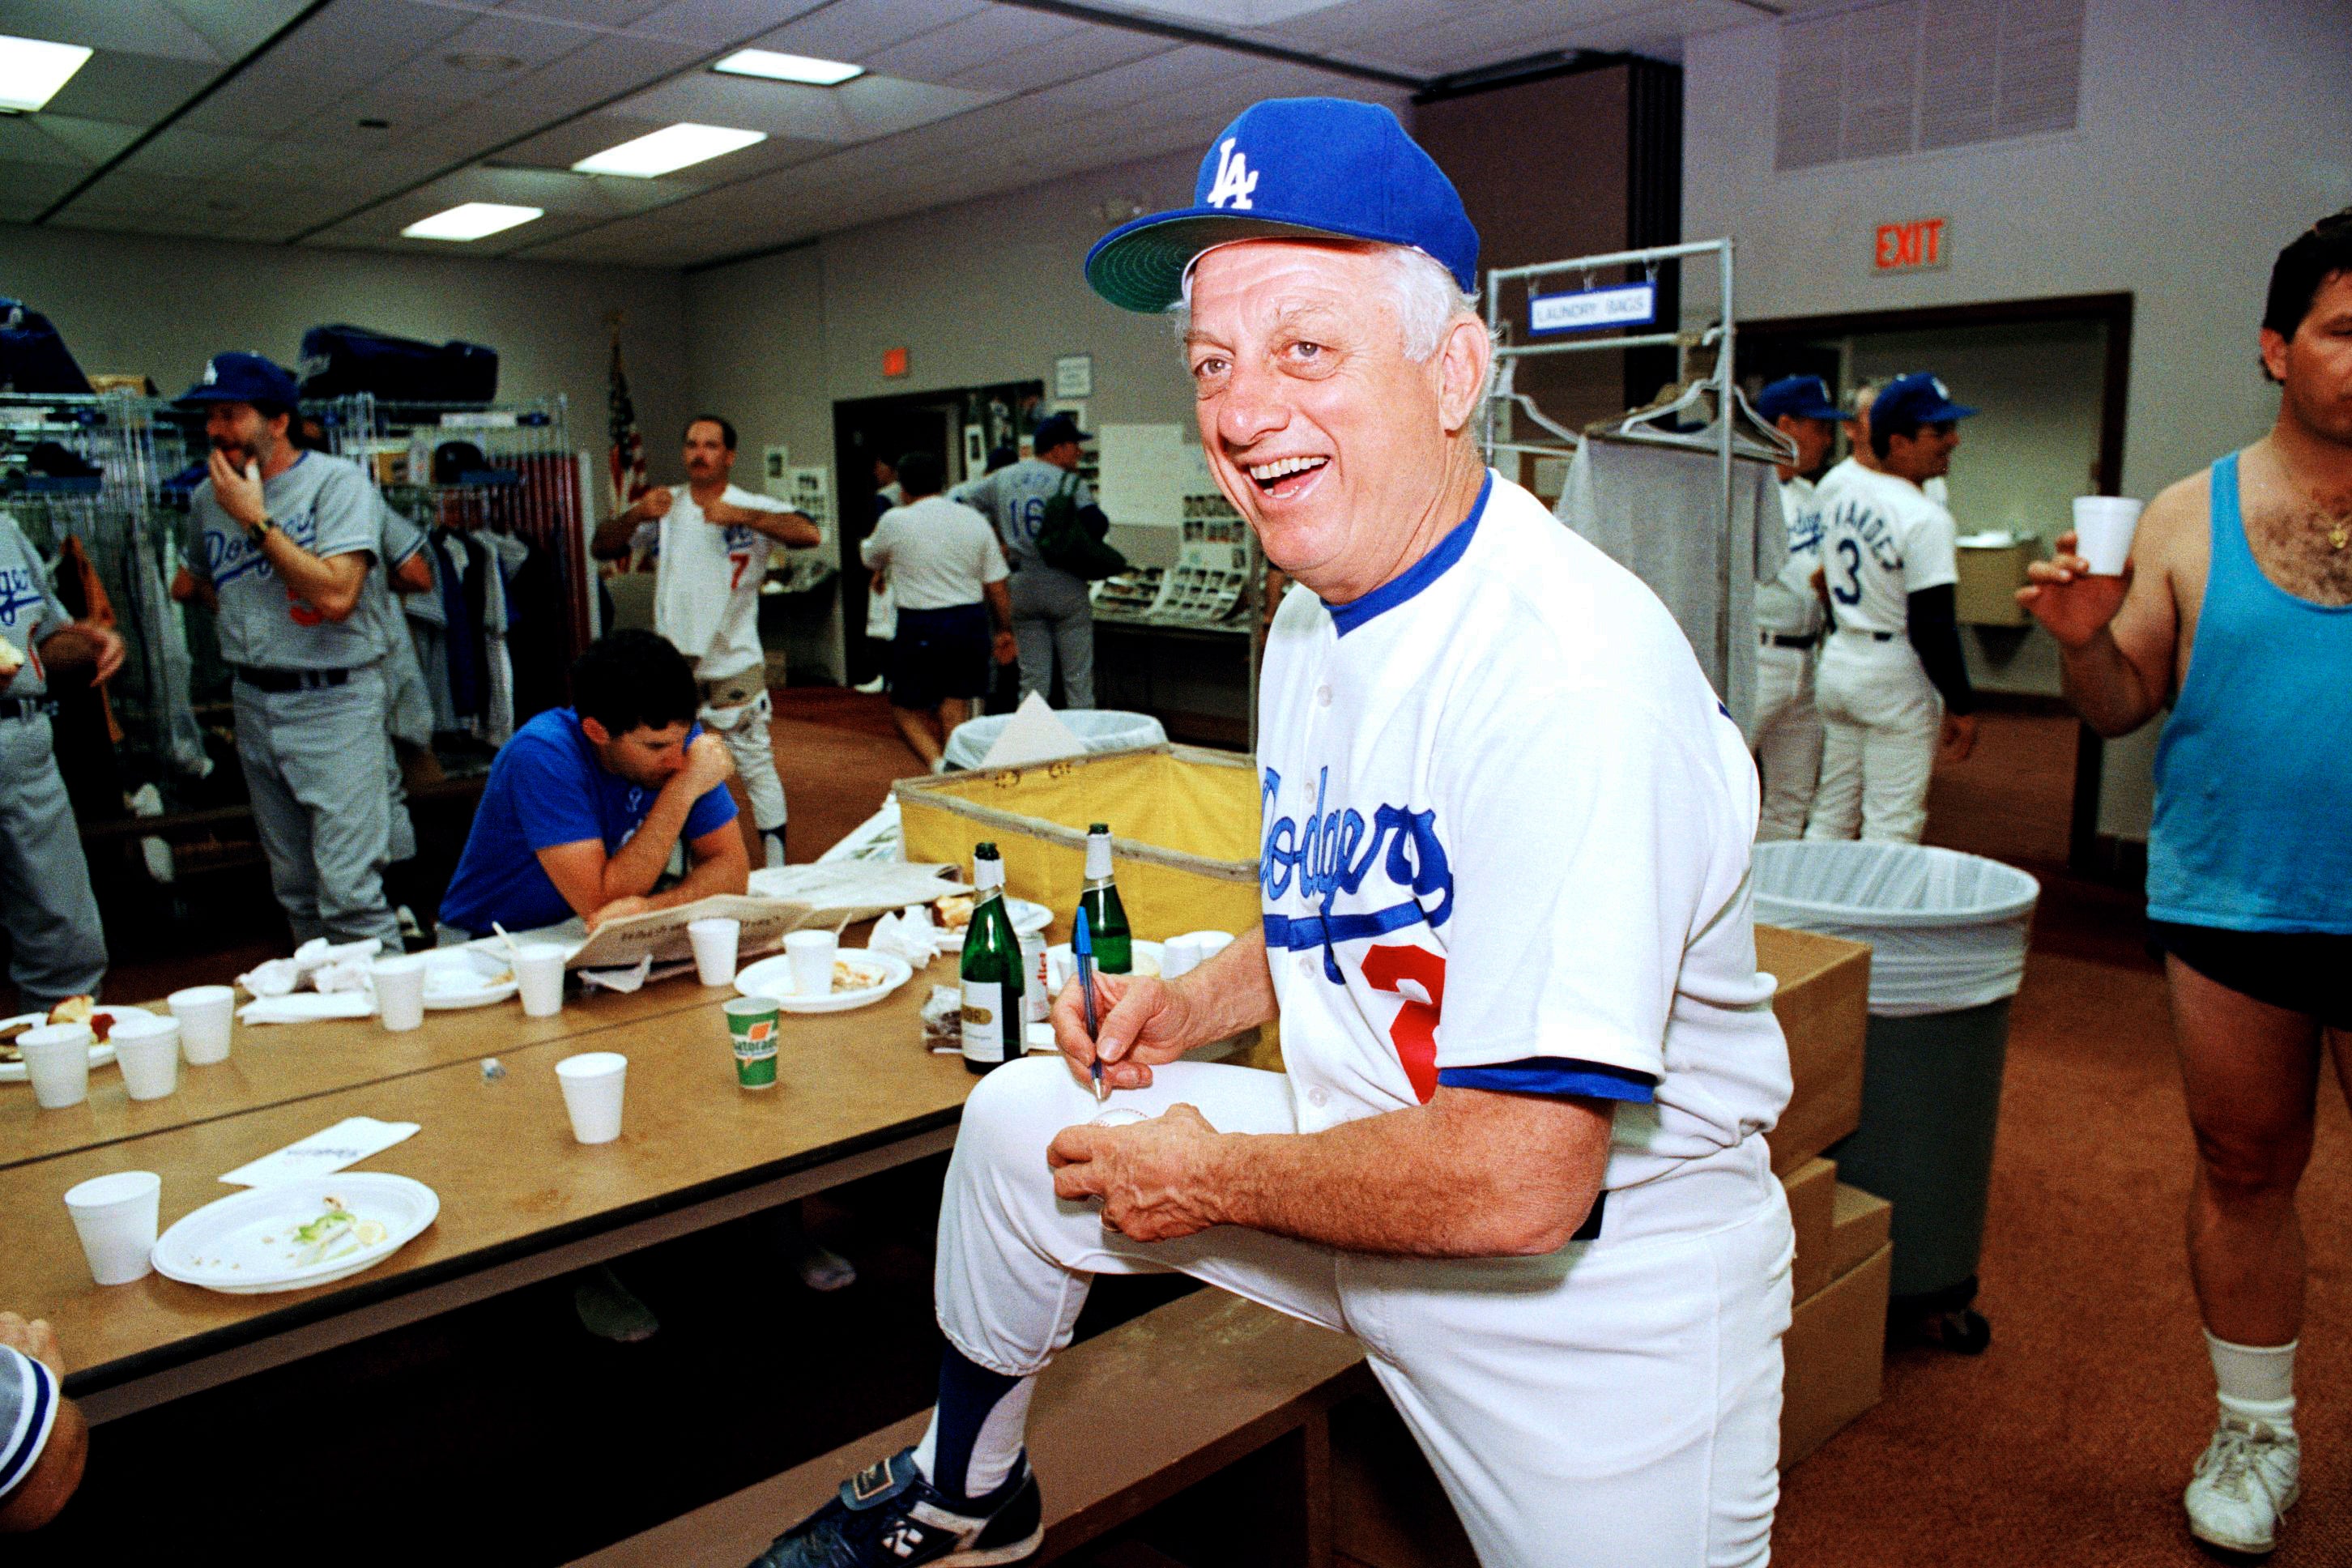 Tommy Lasorda, Hall of Fame Los Angeles Dodgers manager, dies at 93